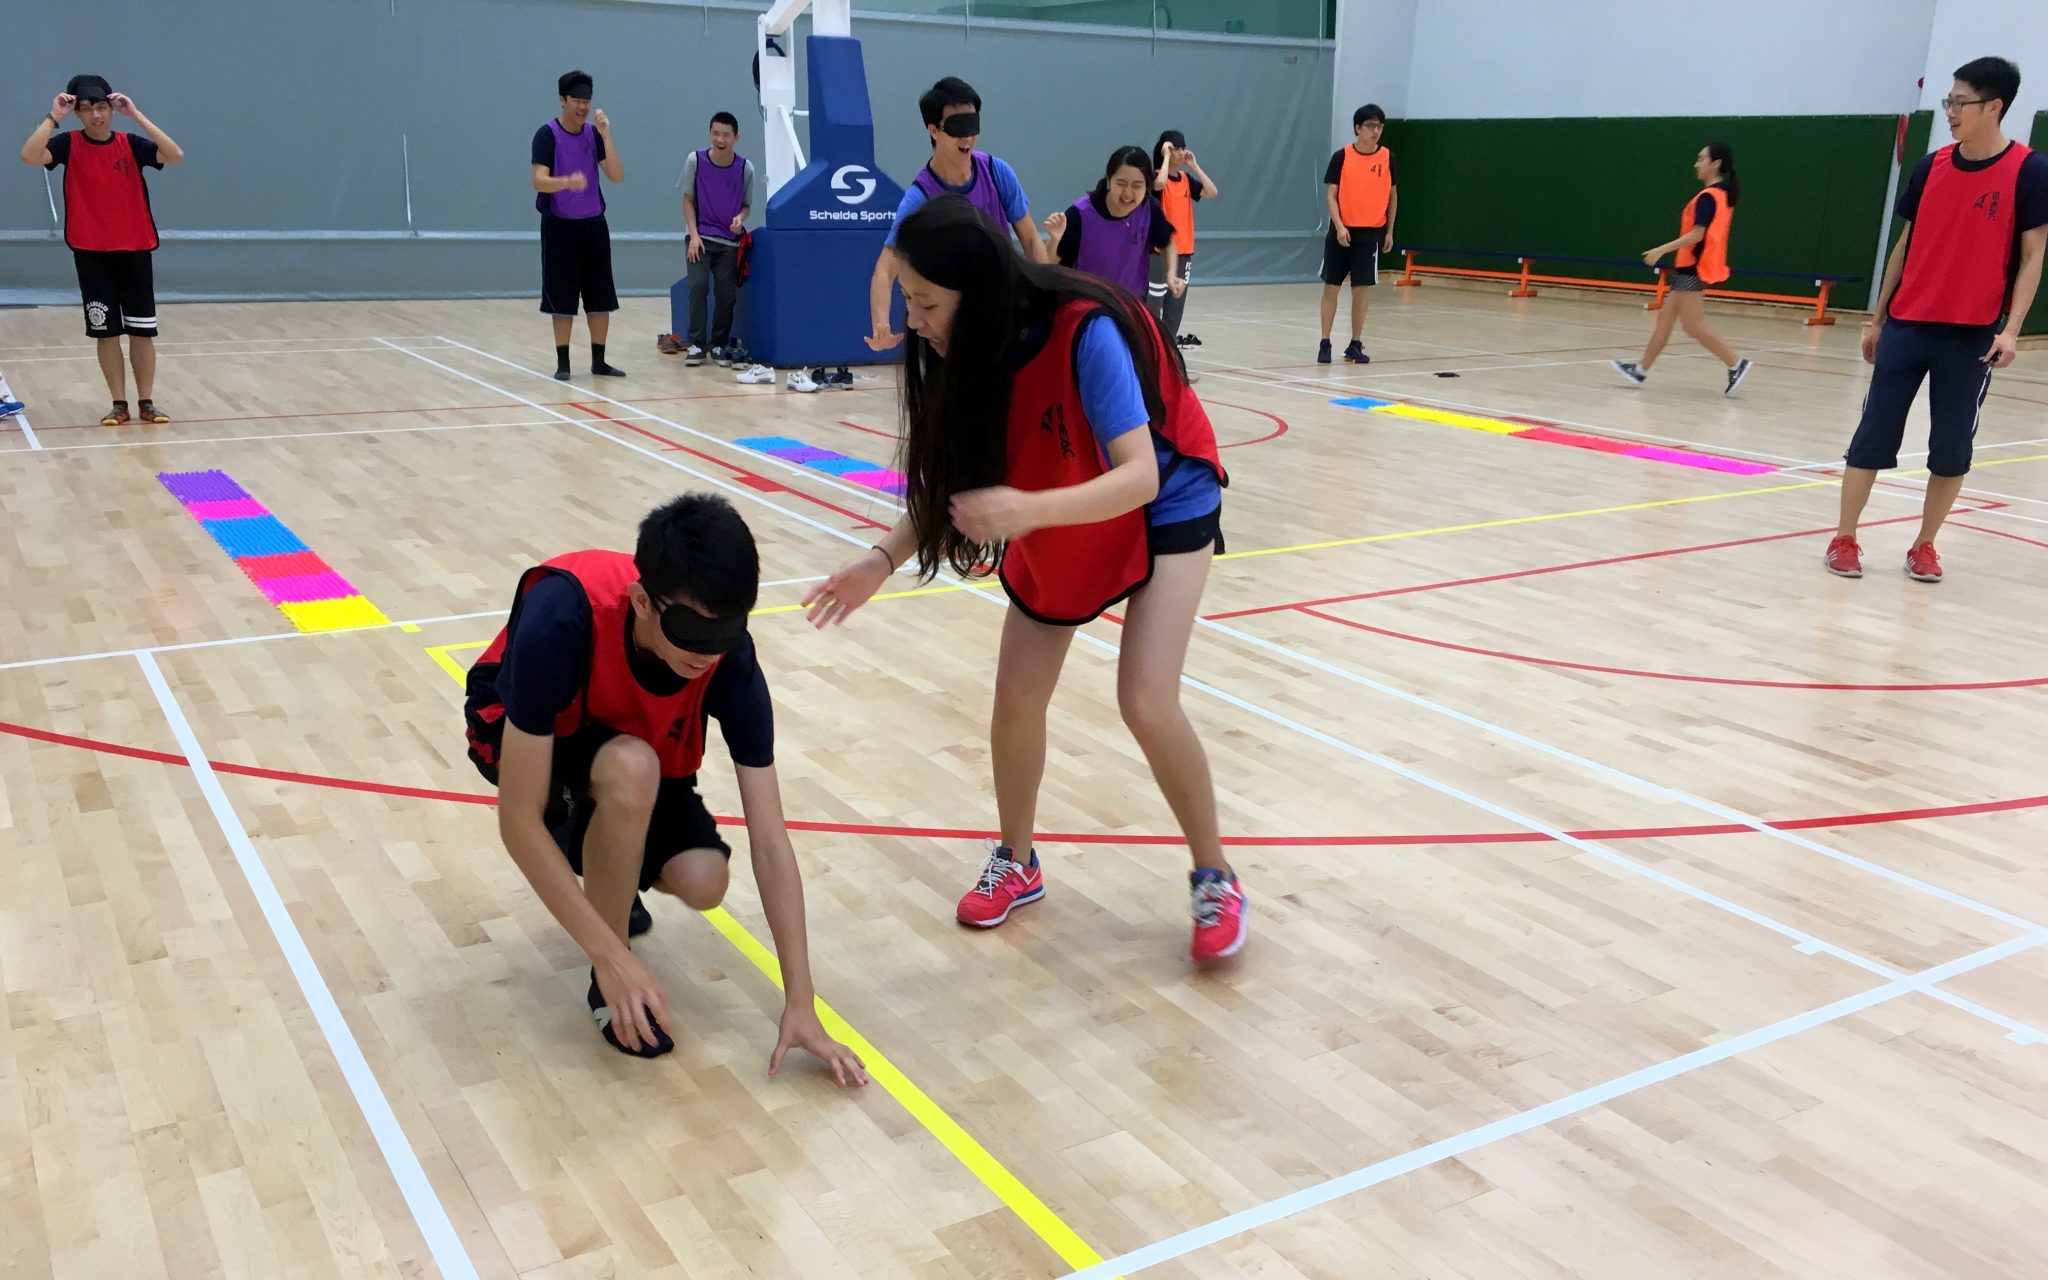 Students were blindfolded and led by partners to complete the "Boys and Girls, Go Go Go" game. 參賽隊員被蒙着眼睛在隊友的引領下完成遊戲。